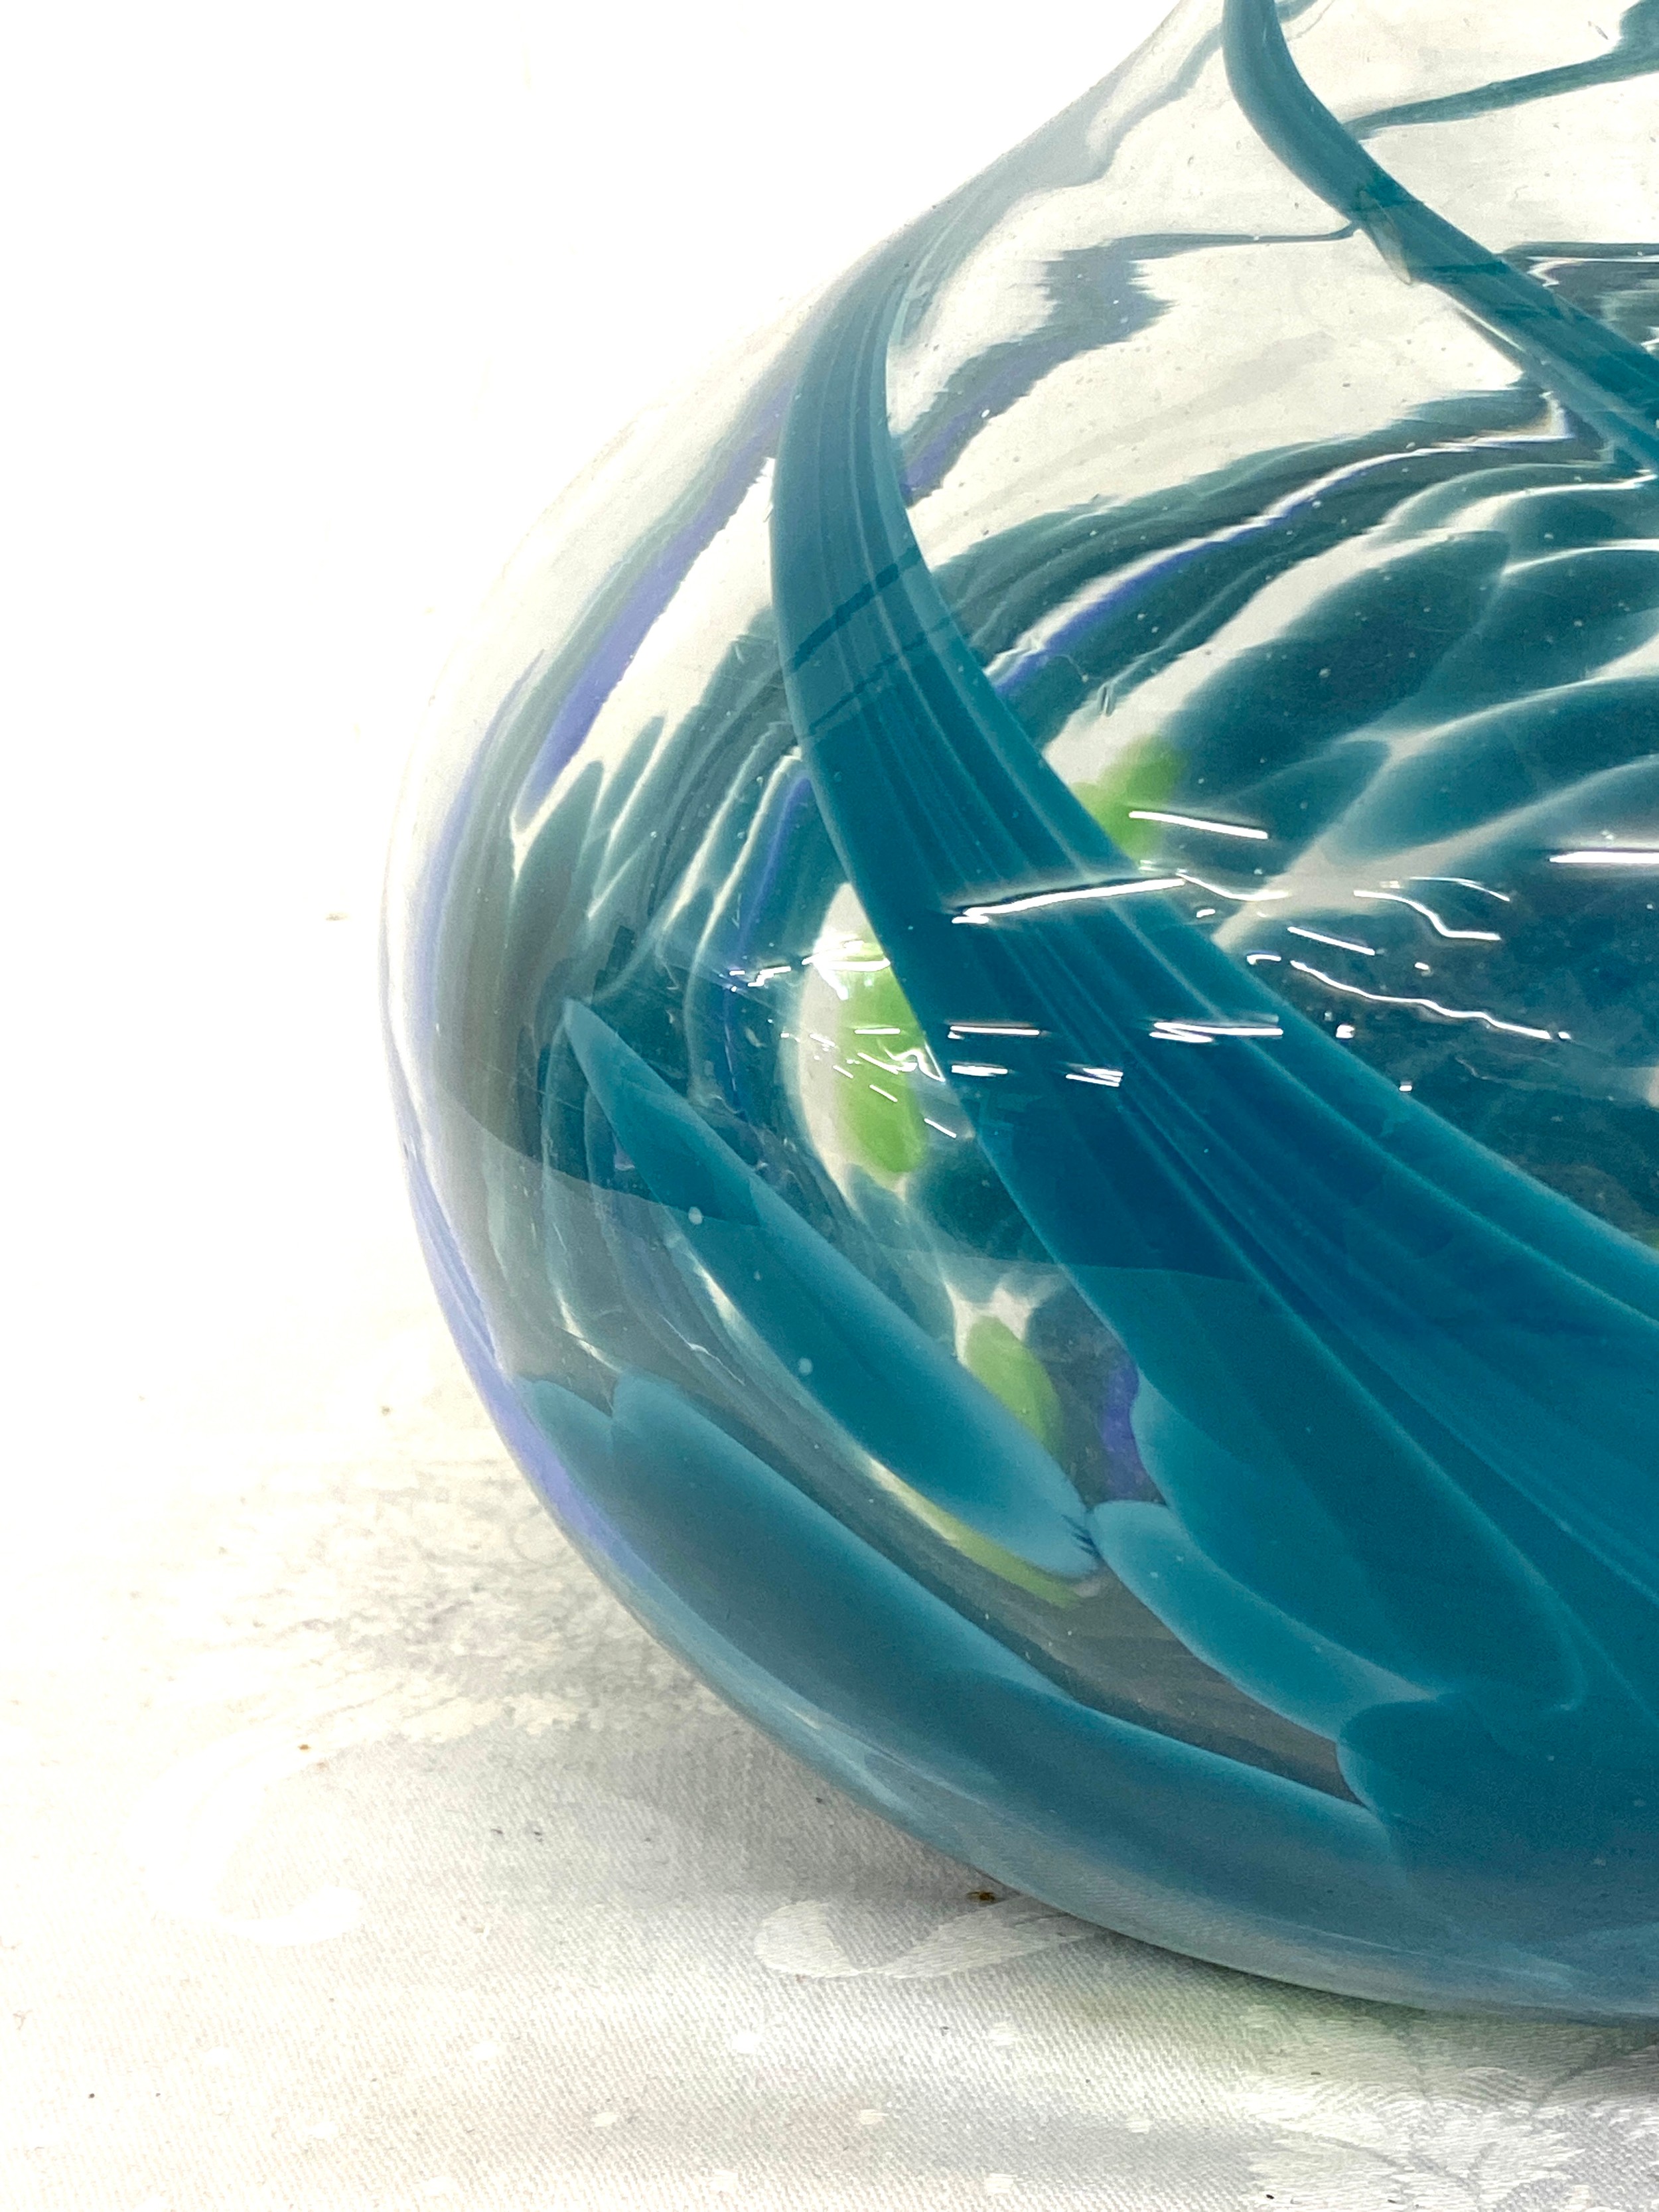 Decorative swirl glass vase, approximate height 12 inches - Image 3 of 5